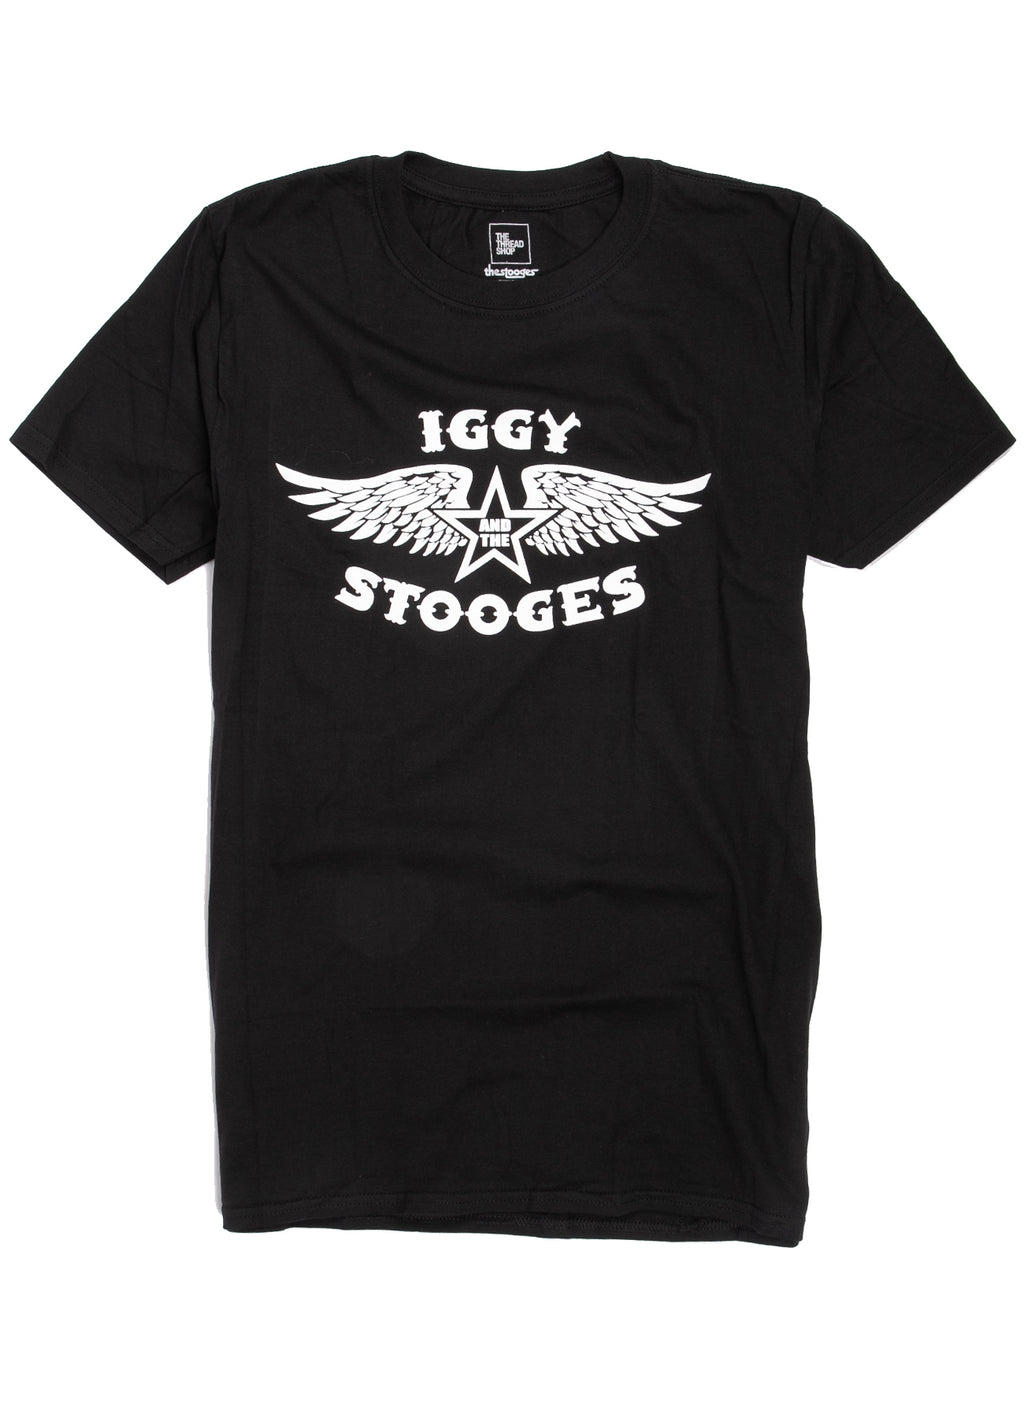 Iggy & The Stooges wings t-shirt.